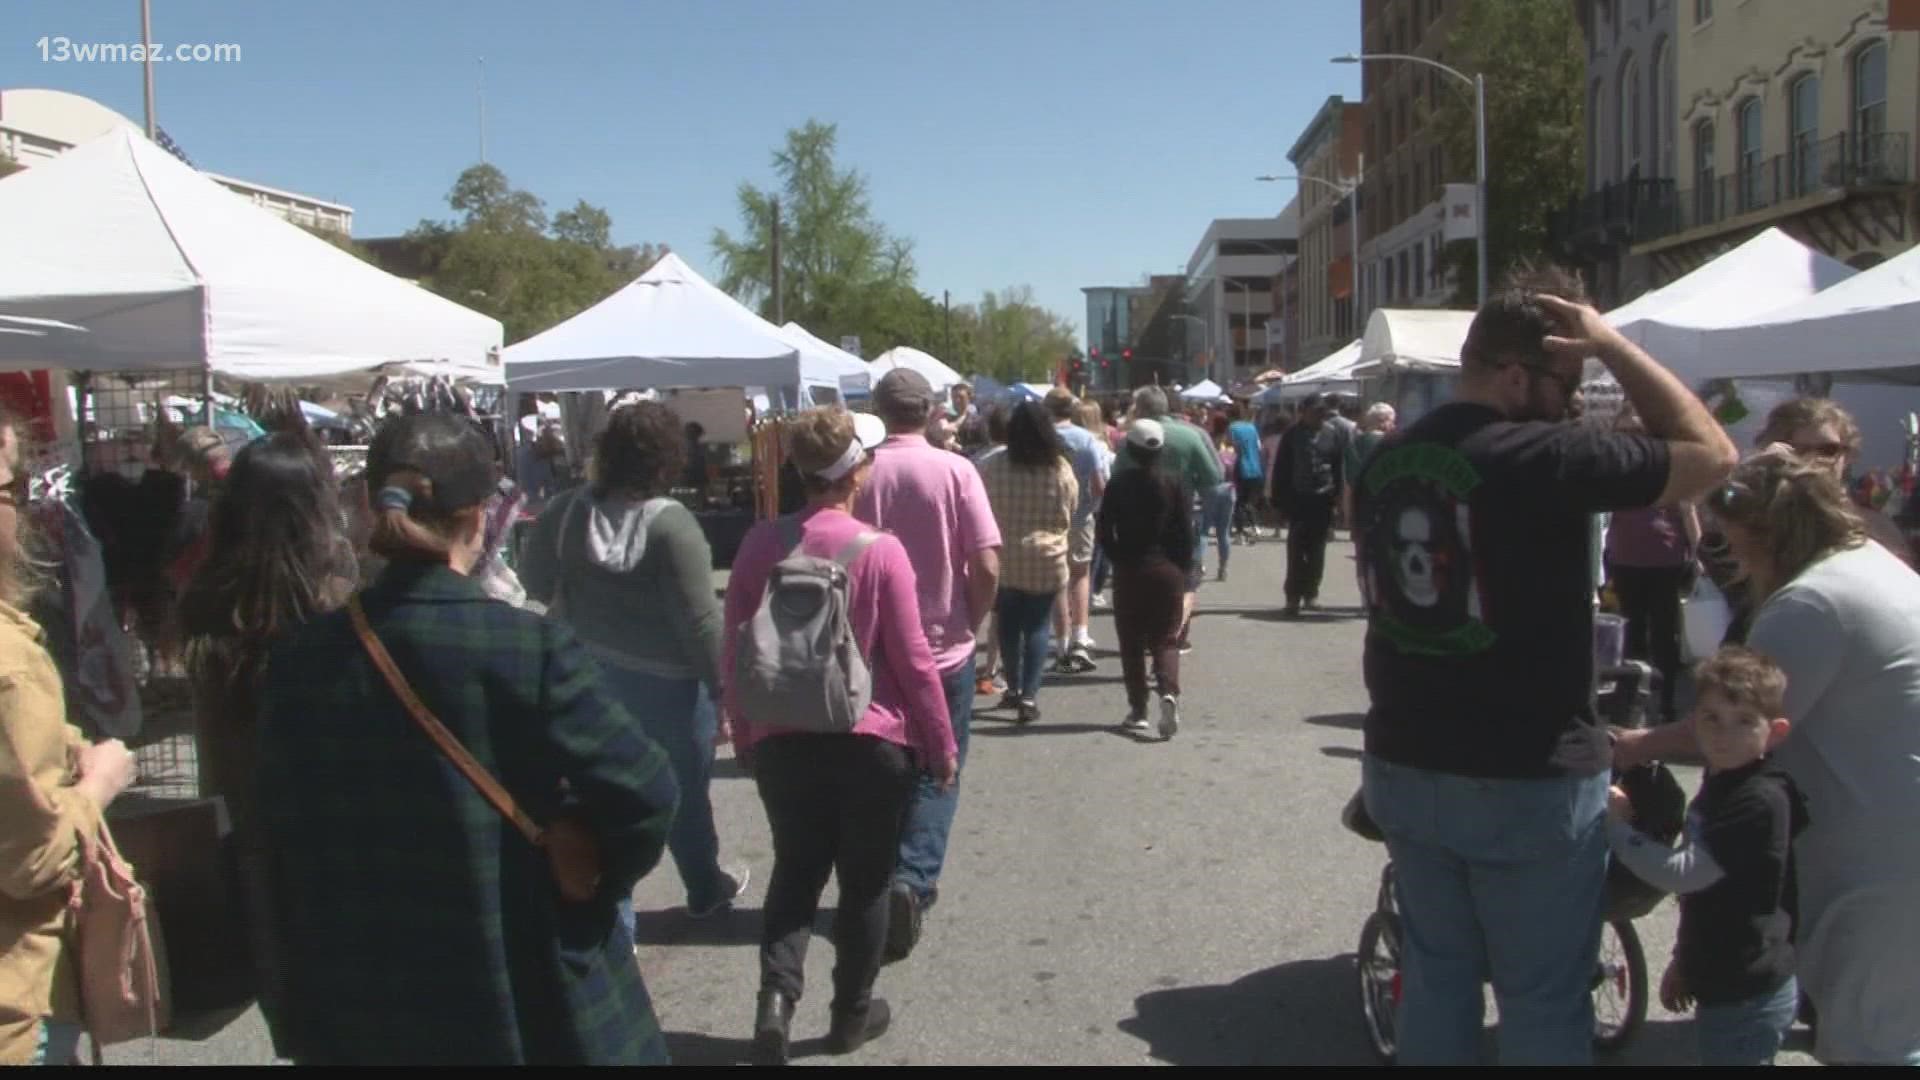 The festival stretches nearly a quarter mile from Broadway to Second Street on Mulberry.